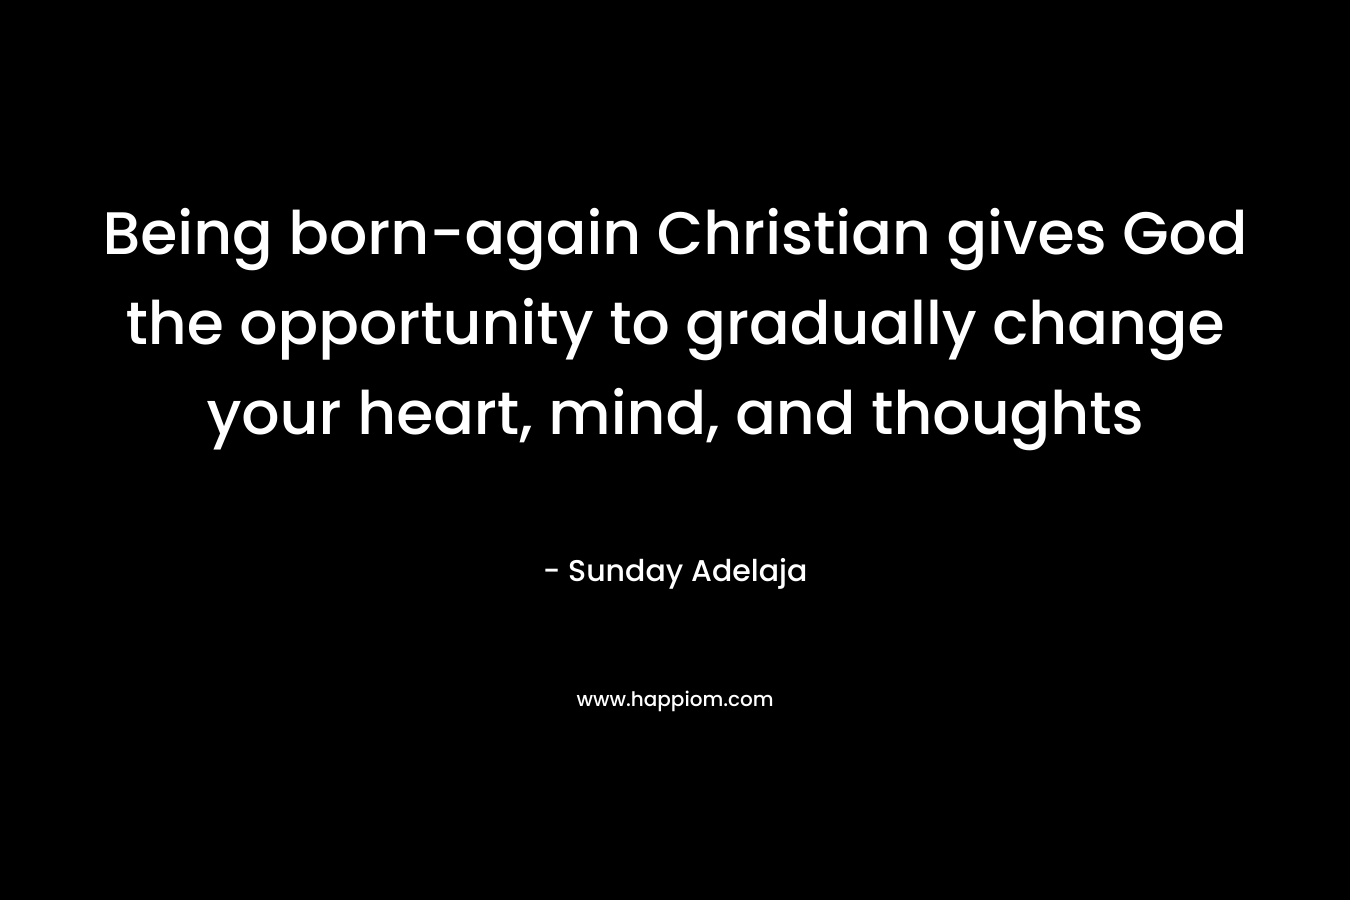 Being born-again Christian gives God the opportunity to gradually change your heart, mind, and thoughts